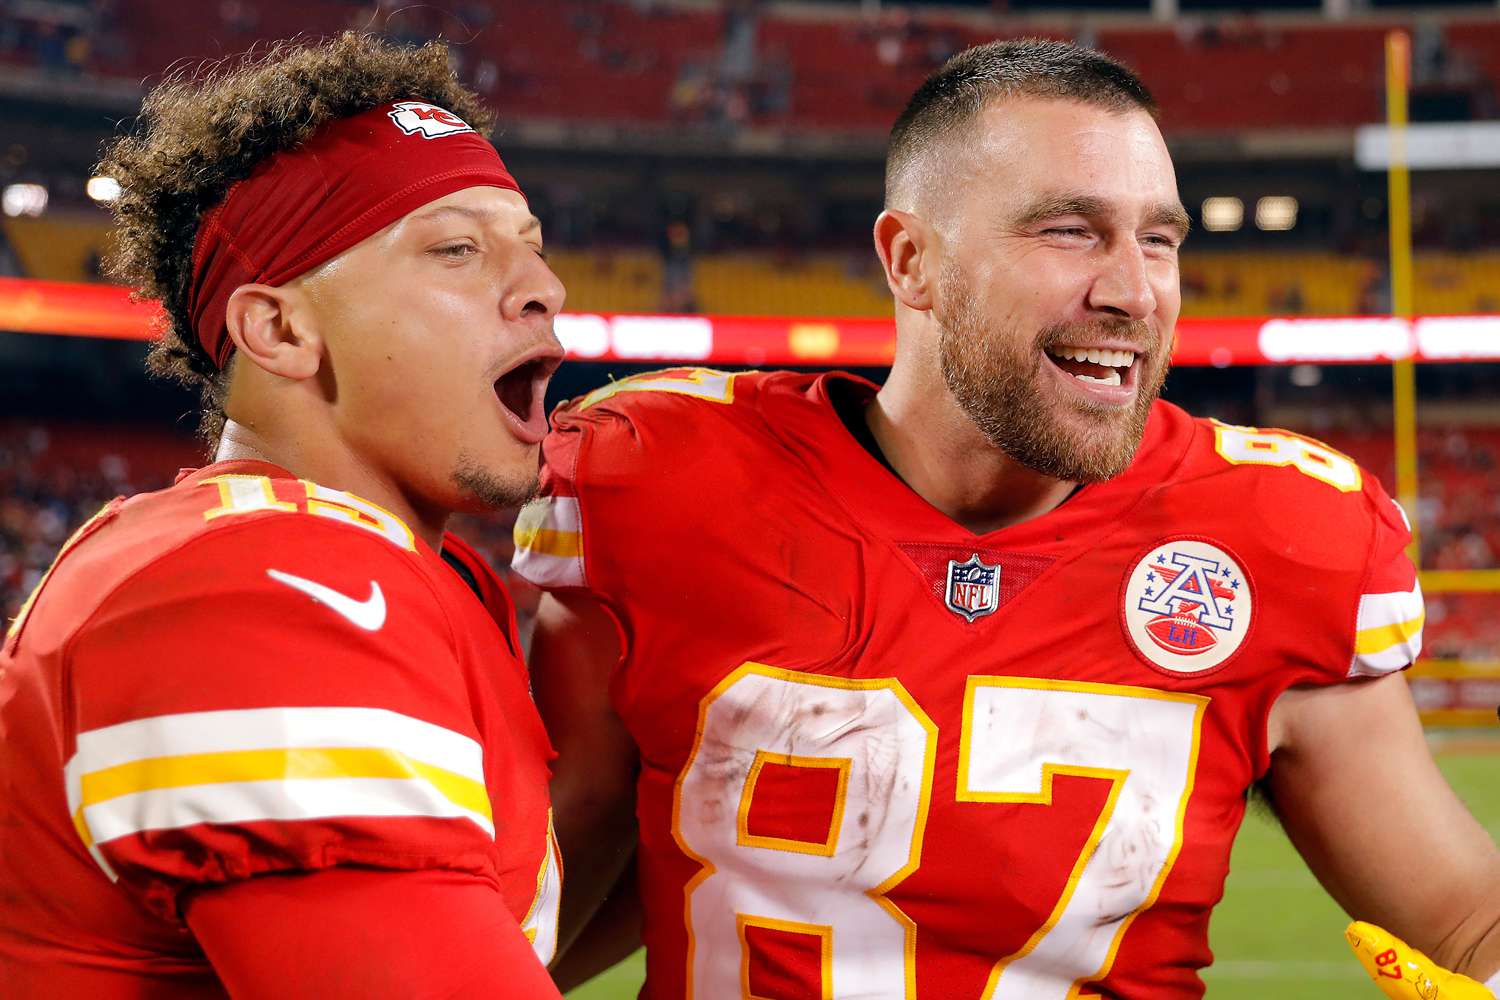 Are the Kansas City Chiefs Overplaying Their Hand With Wild Trade Proposals This Offseason?